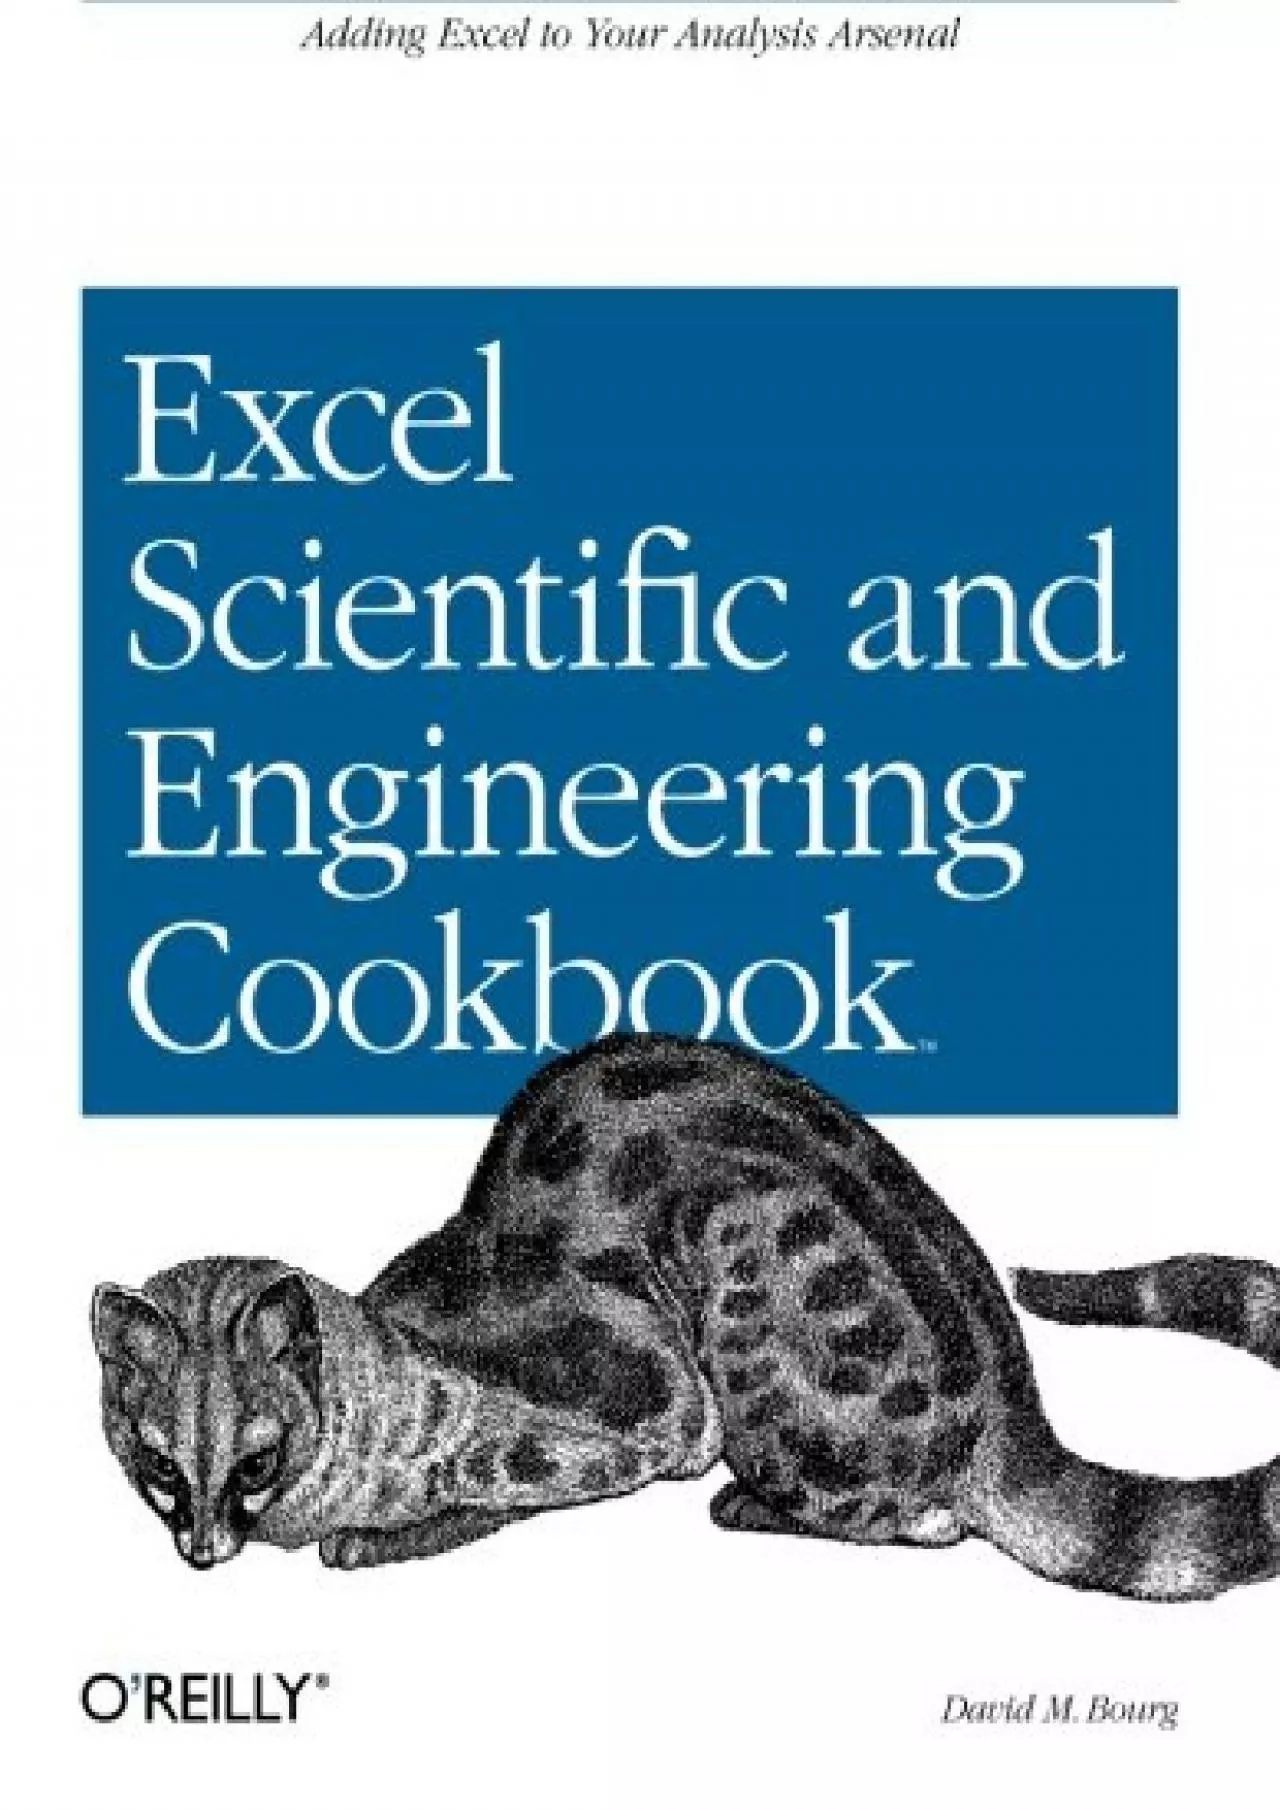 (EBOOK)-Excel Scientific and Engineering Cookbook: Adding Excel to Your Analysis Arsenal